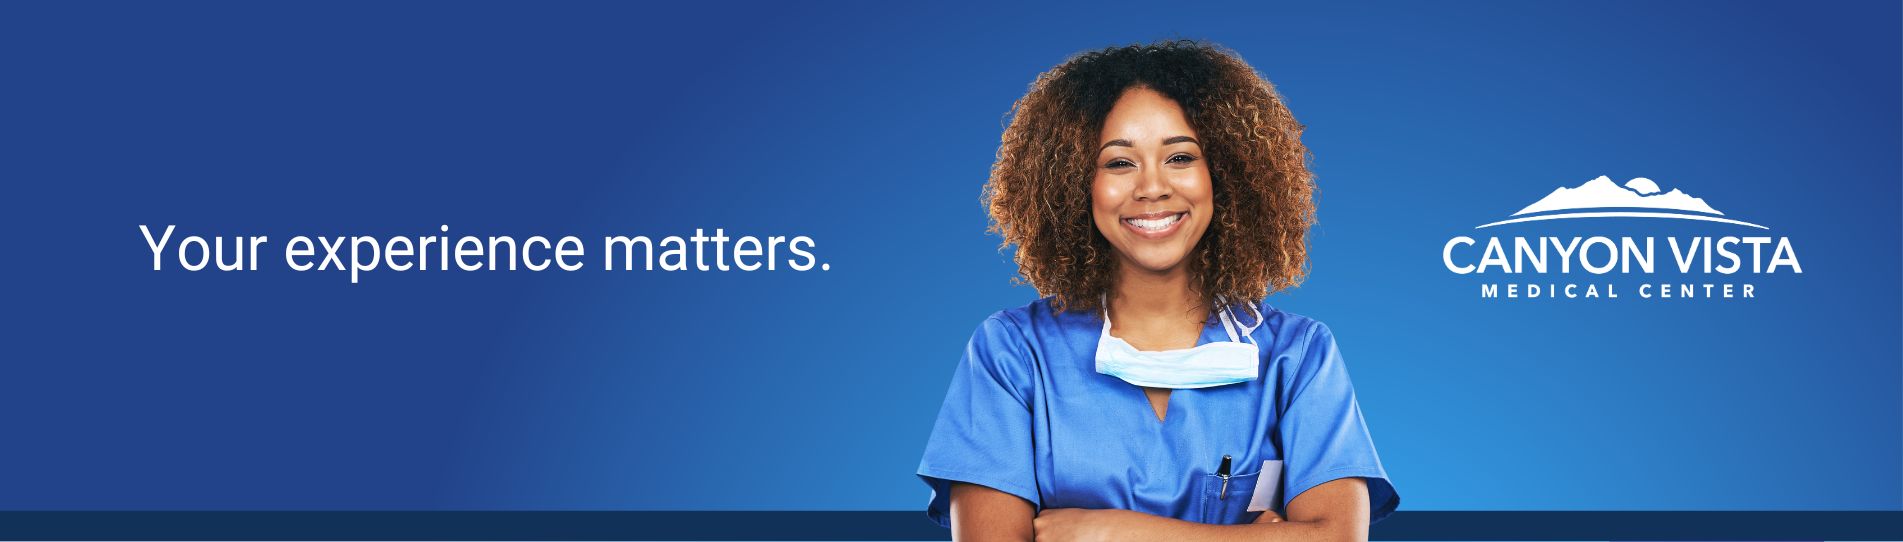 Banner graphic with image of nurse, Canyon Vista logo, and text "your experience matters."